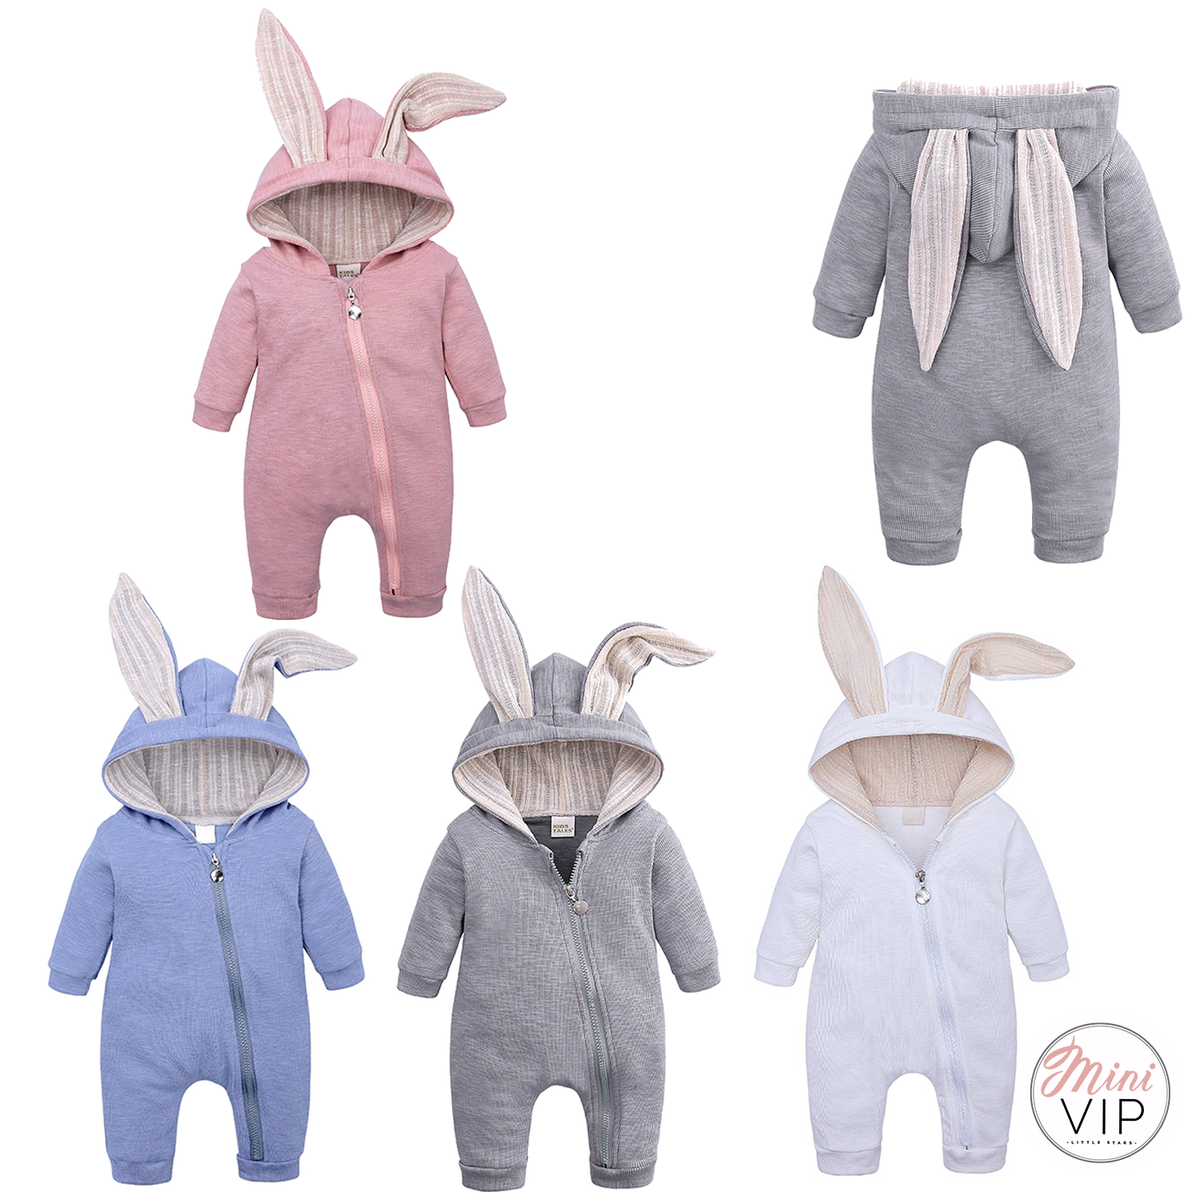 Cute Bunny Romper/All in One - personalisation available